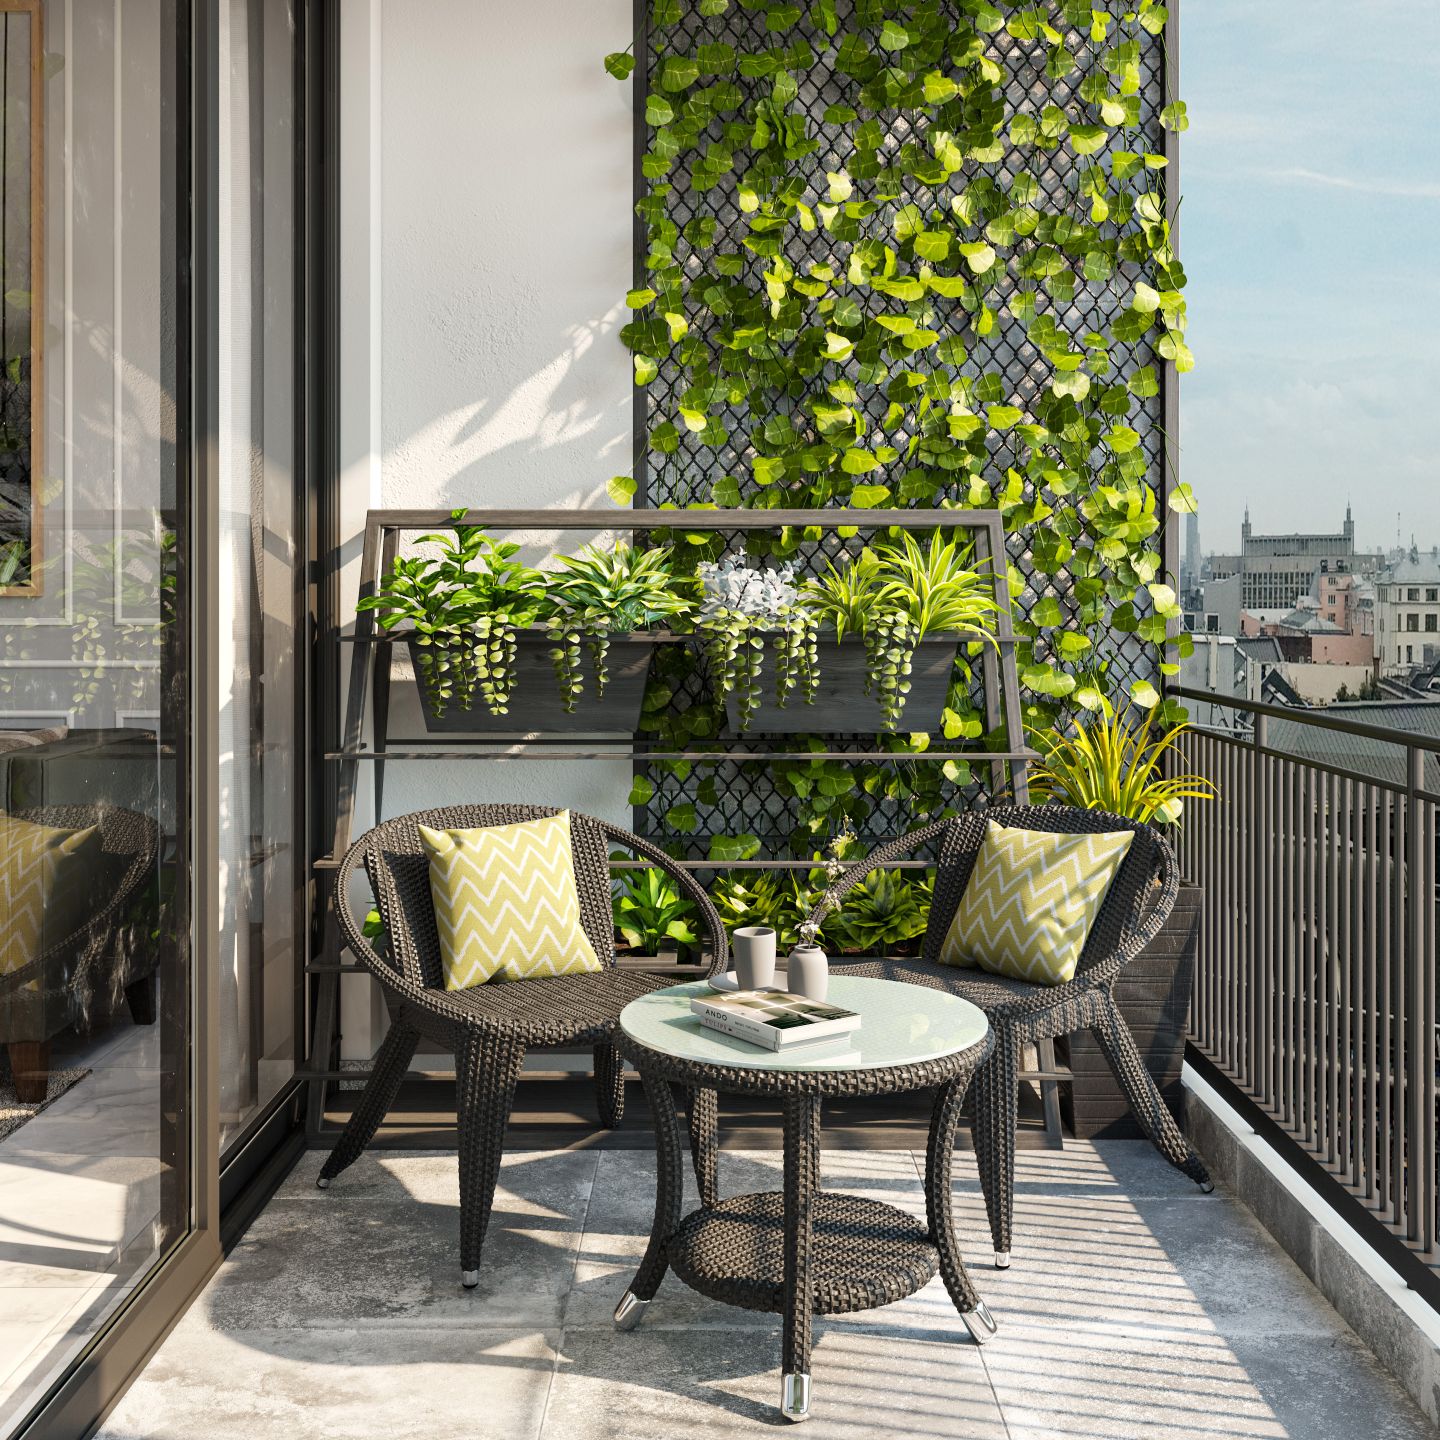 Modern Spacious Balcony Design with Railing and Plants - Livspace